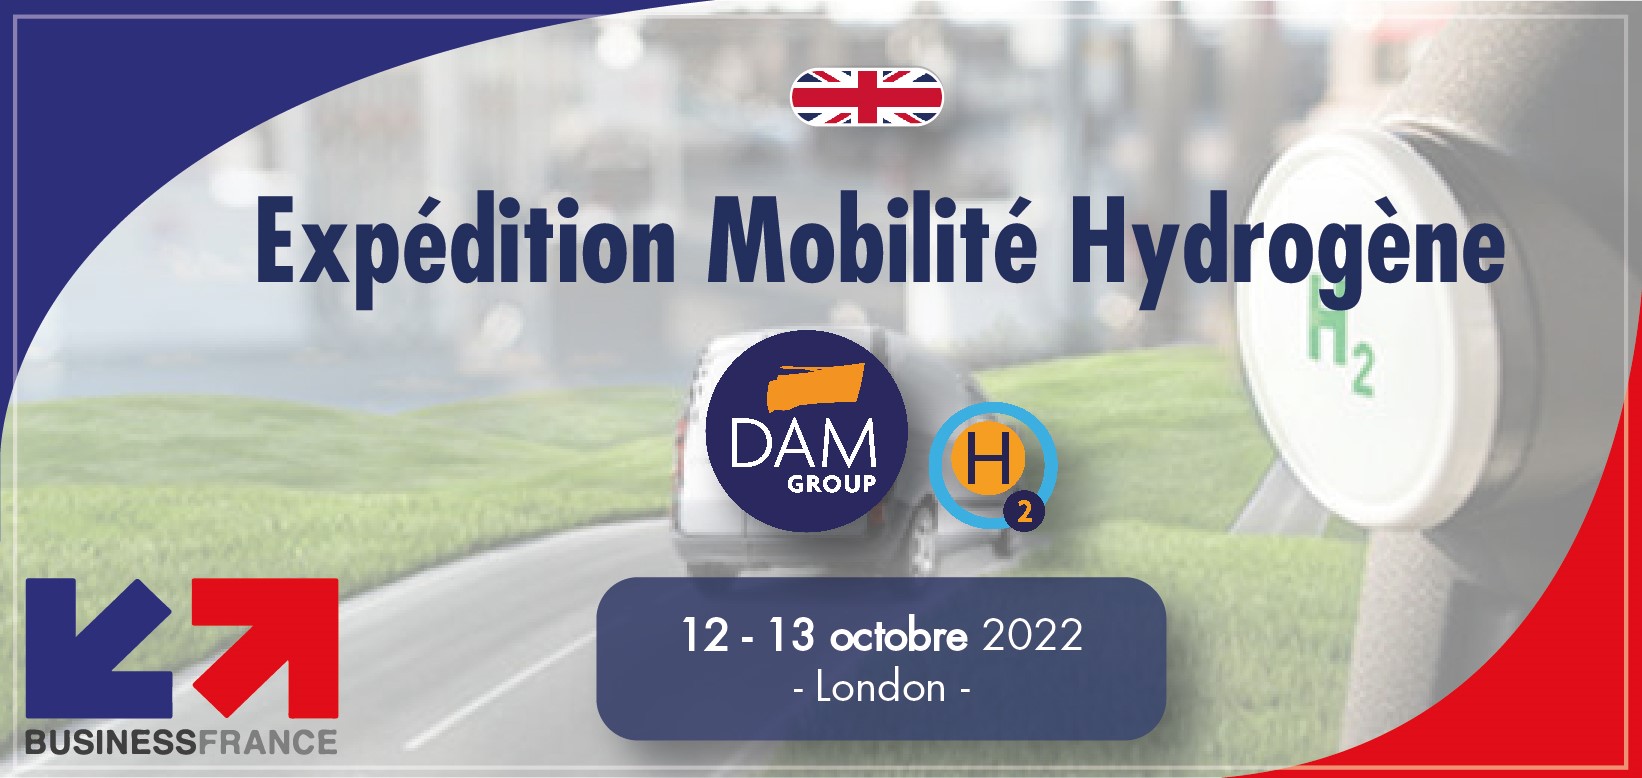 DAM GROUP ANNOUNCES ITS PARTICIPATION IN THE EVENT: “EXPEDITION MOBILITE HYDROGÈNE 2022” WITH BUSINESS FRANCE!